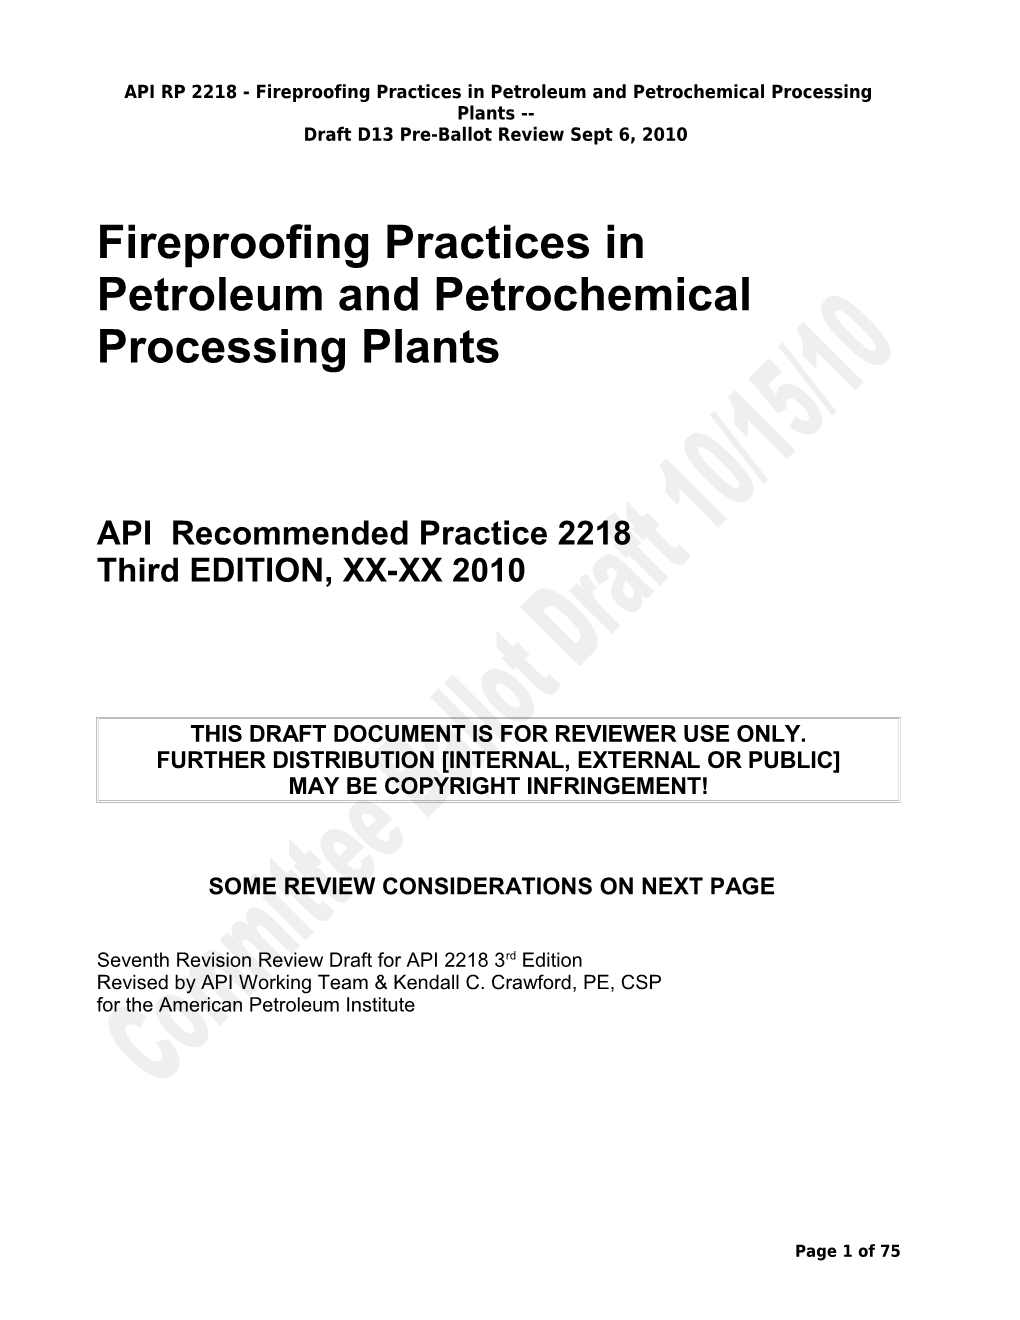 API RP 2218 - Fireproofing Practices in Petroleum and Petrochemical Processing Plants